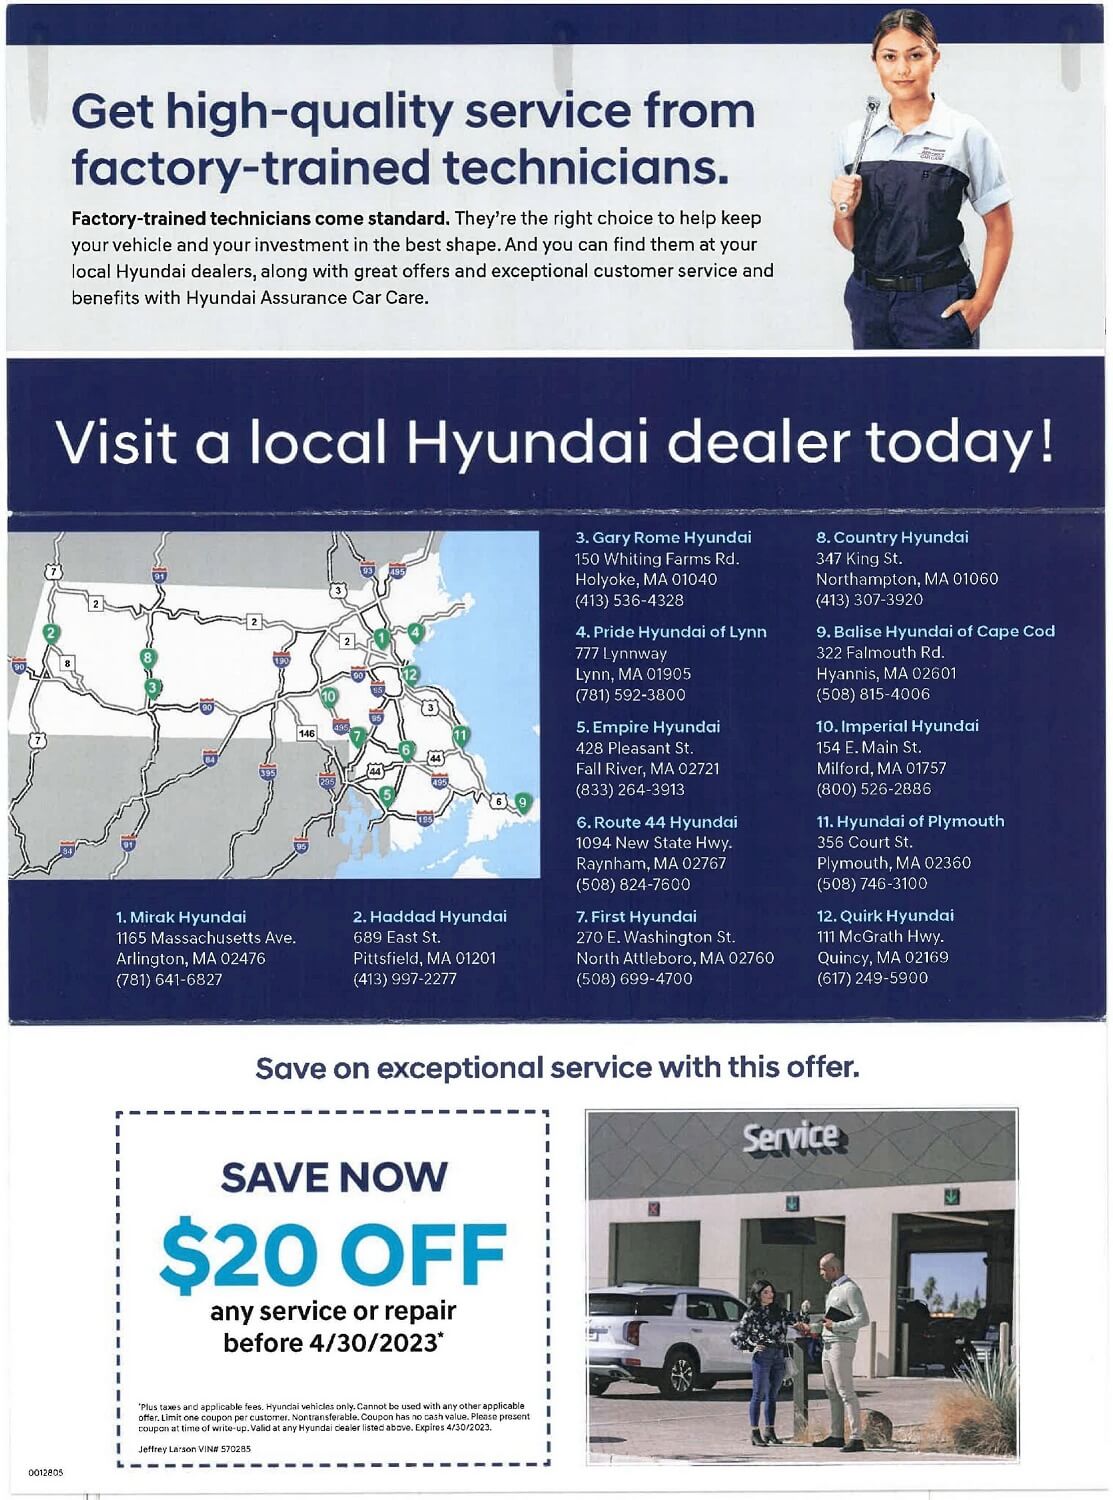 A direct mail piece from a Hyundai dealer with dealership locations and a coupon